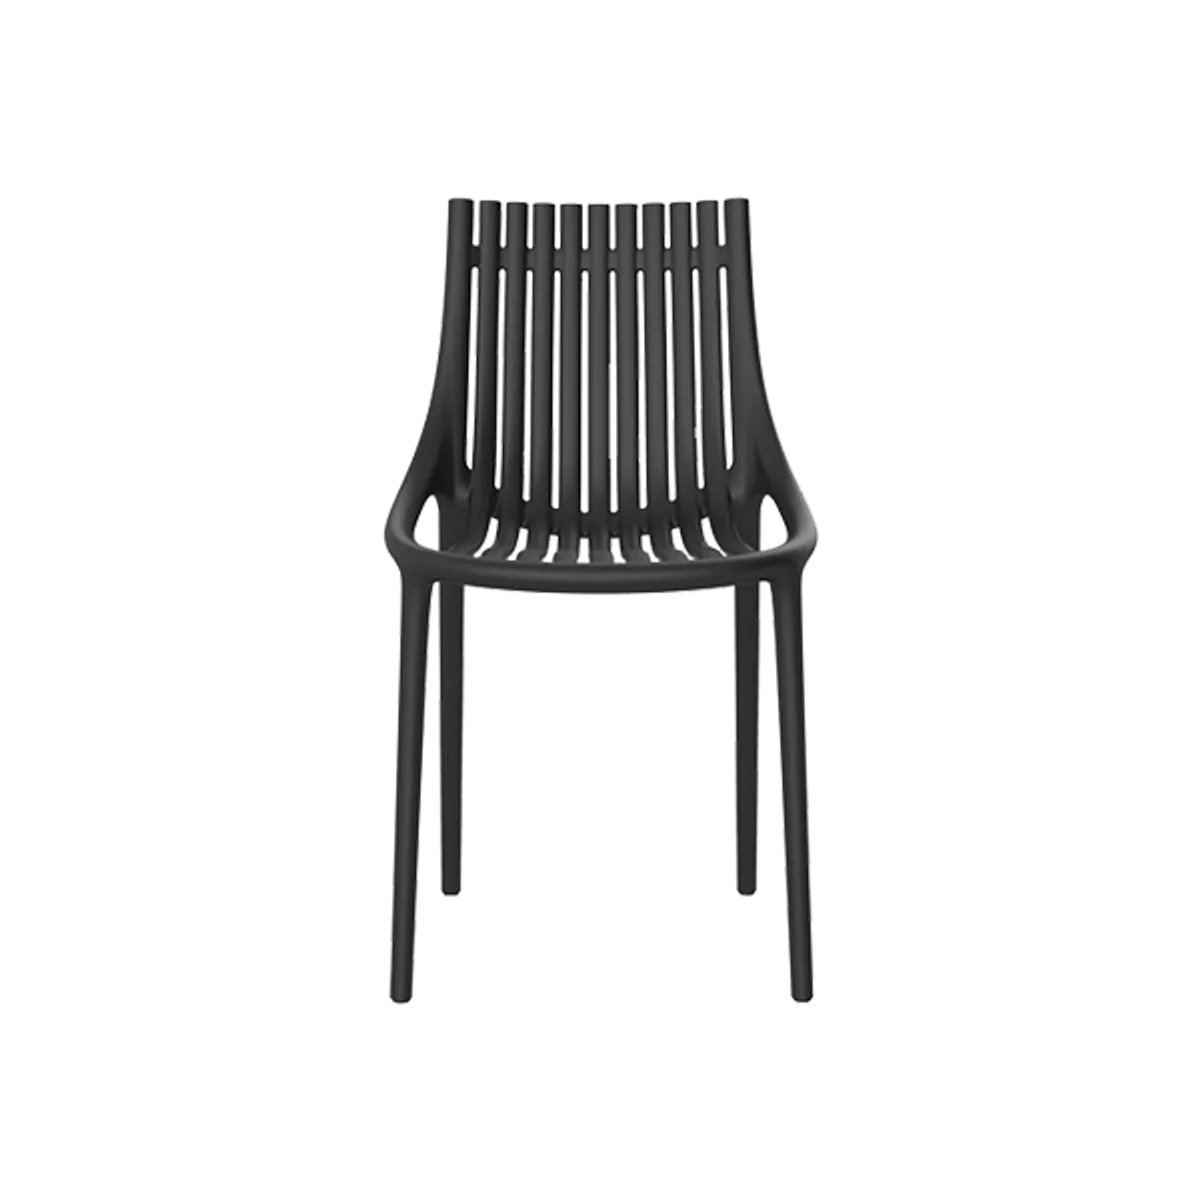 Ibiza Side Chair Inside Out Contracts